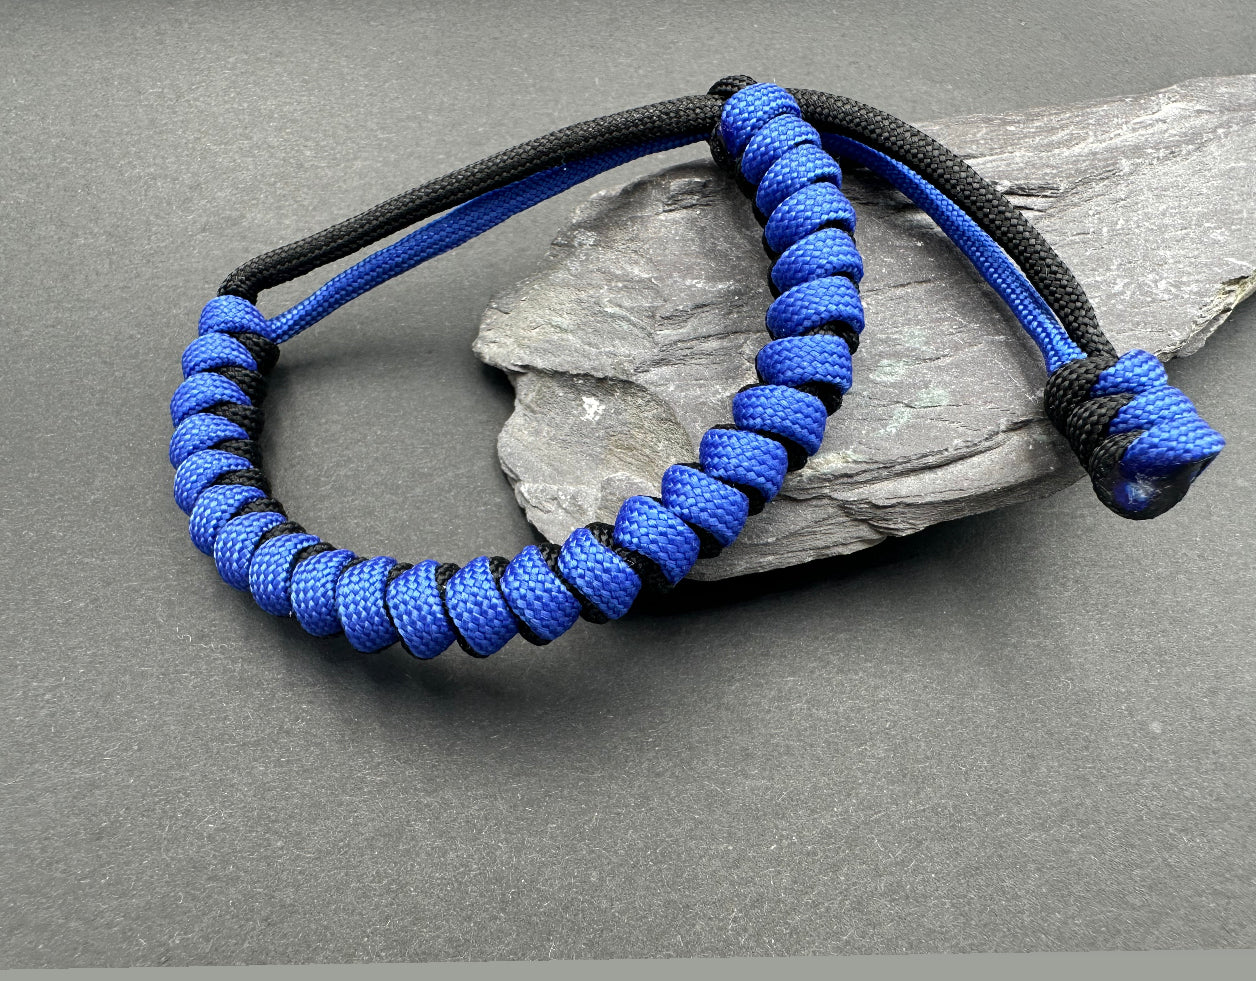 Paracord survival bracelets in a Black & Royal blue colour, item is lightweight comfortable and handmade in a snake knott design U.K.